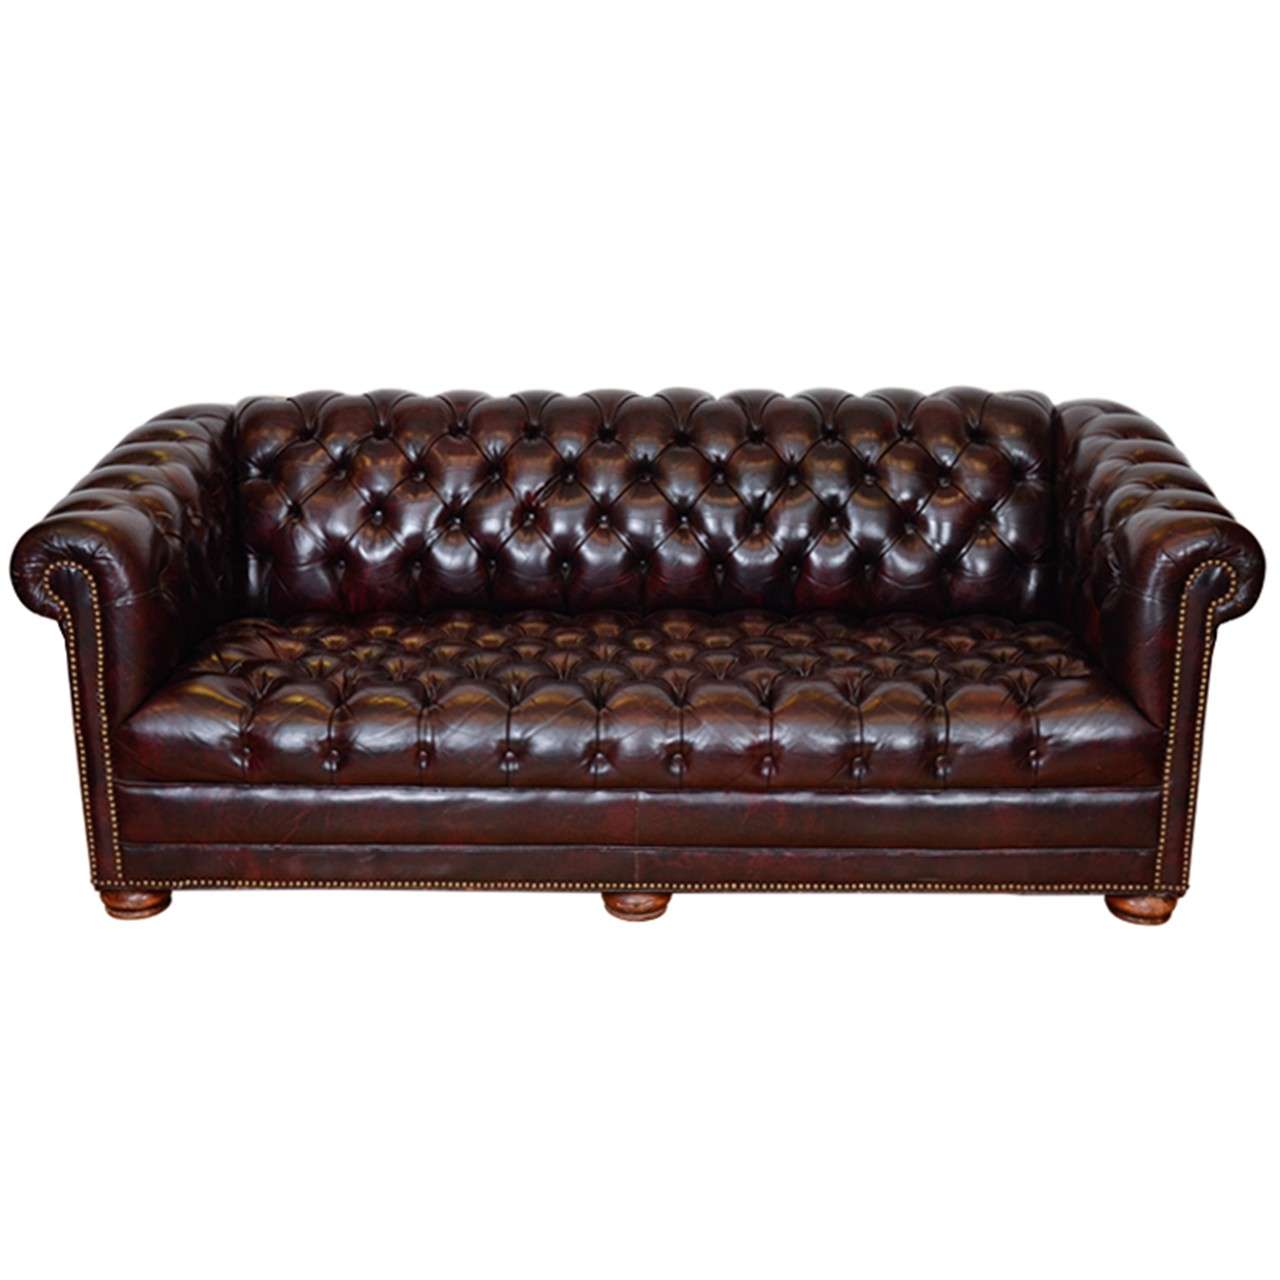 Midcentury Cordovan Chesterfield Sofa W Brass Nail Detailing At